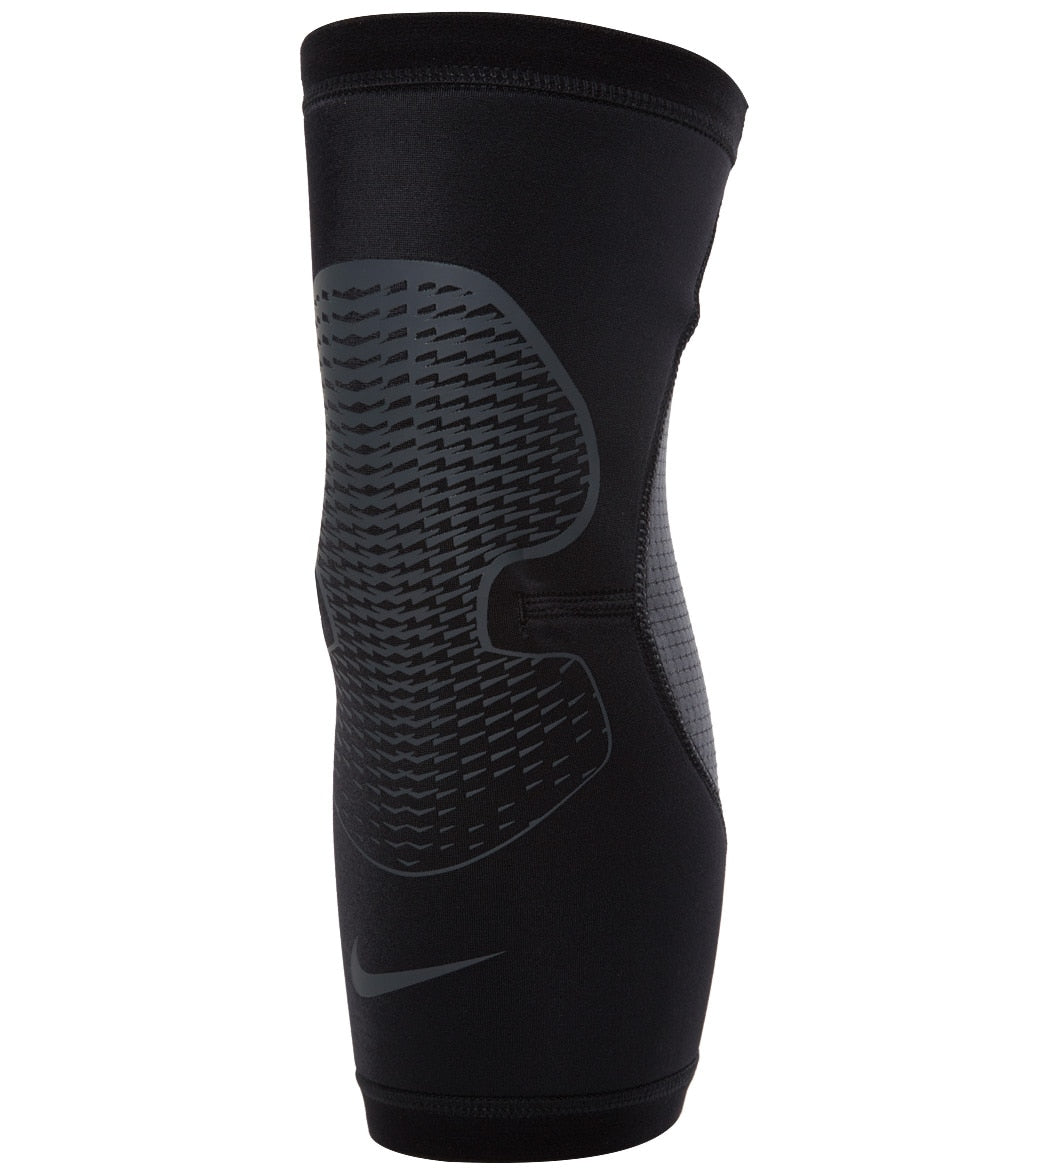 Nike Pro Hyperstrong Knee Sleeve 3.0 at SwimOutlet.com